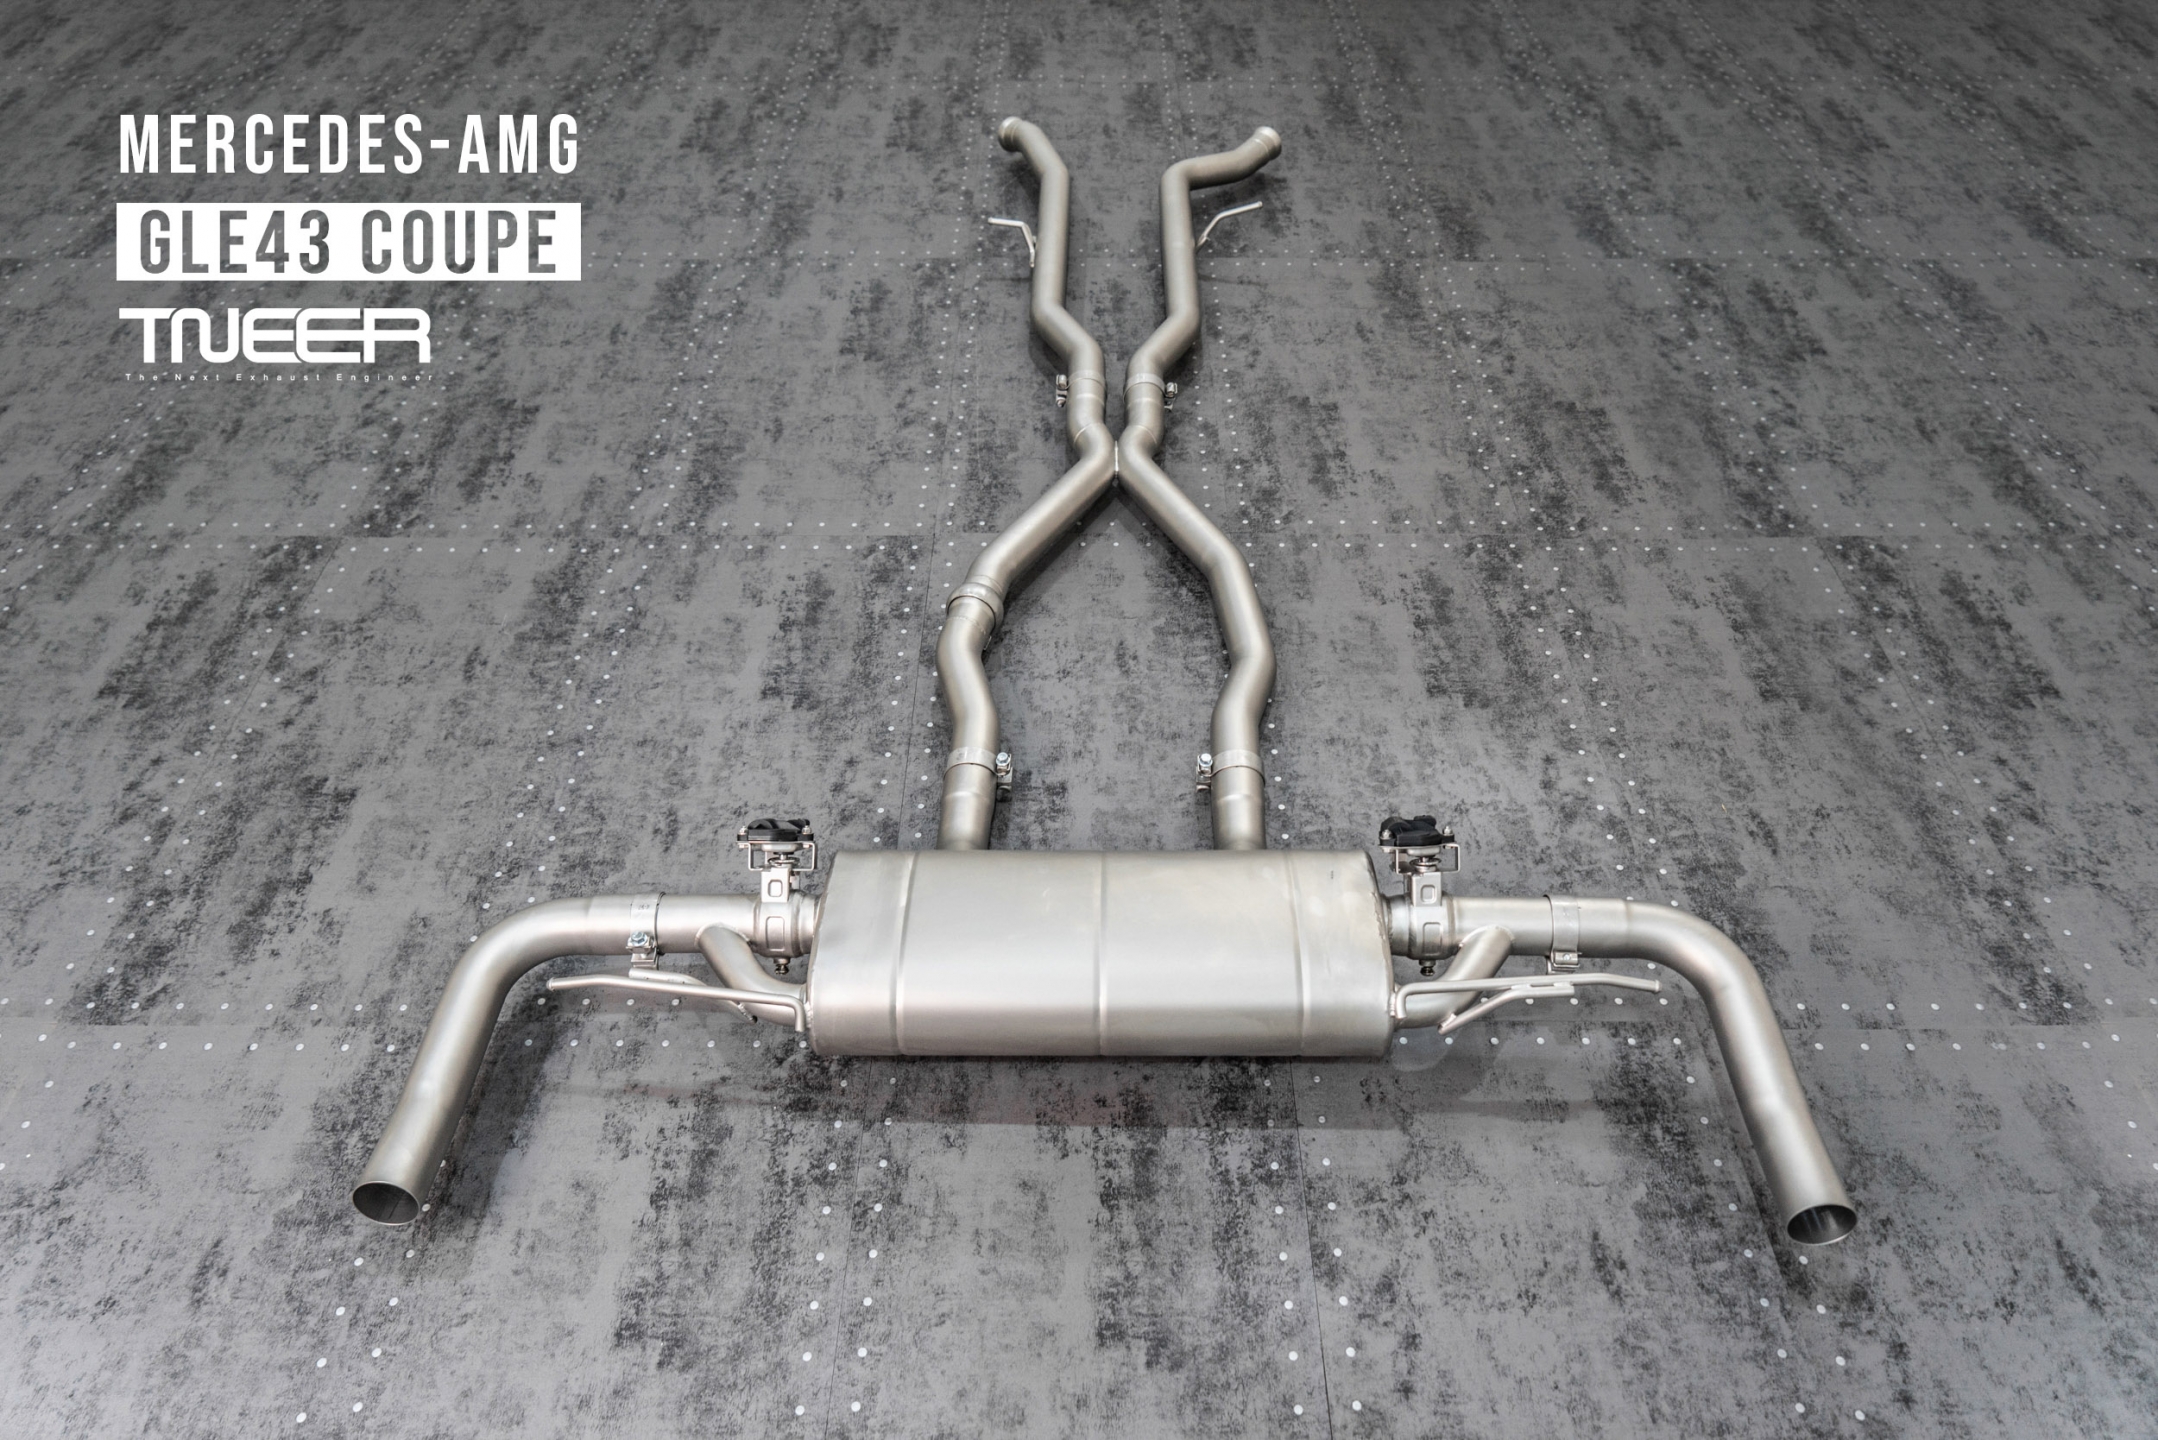 Audi RS6 (C6) 5.0 TFSI V10 TNEER Exhaust System with TACS